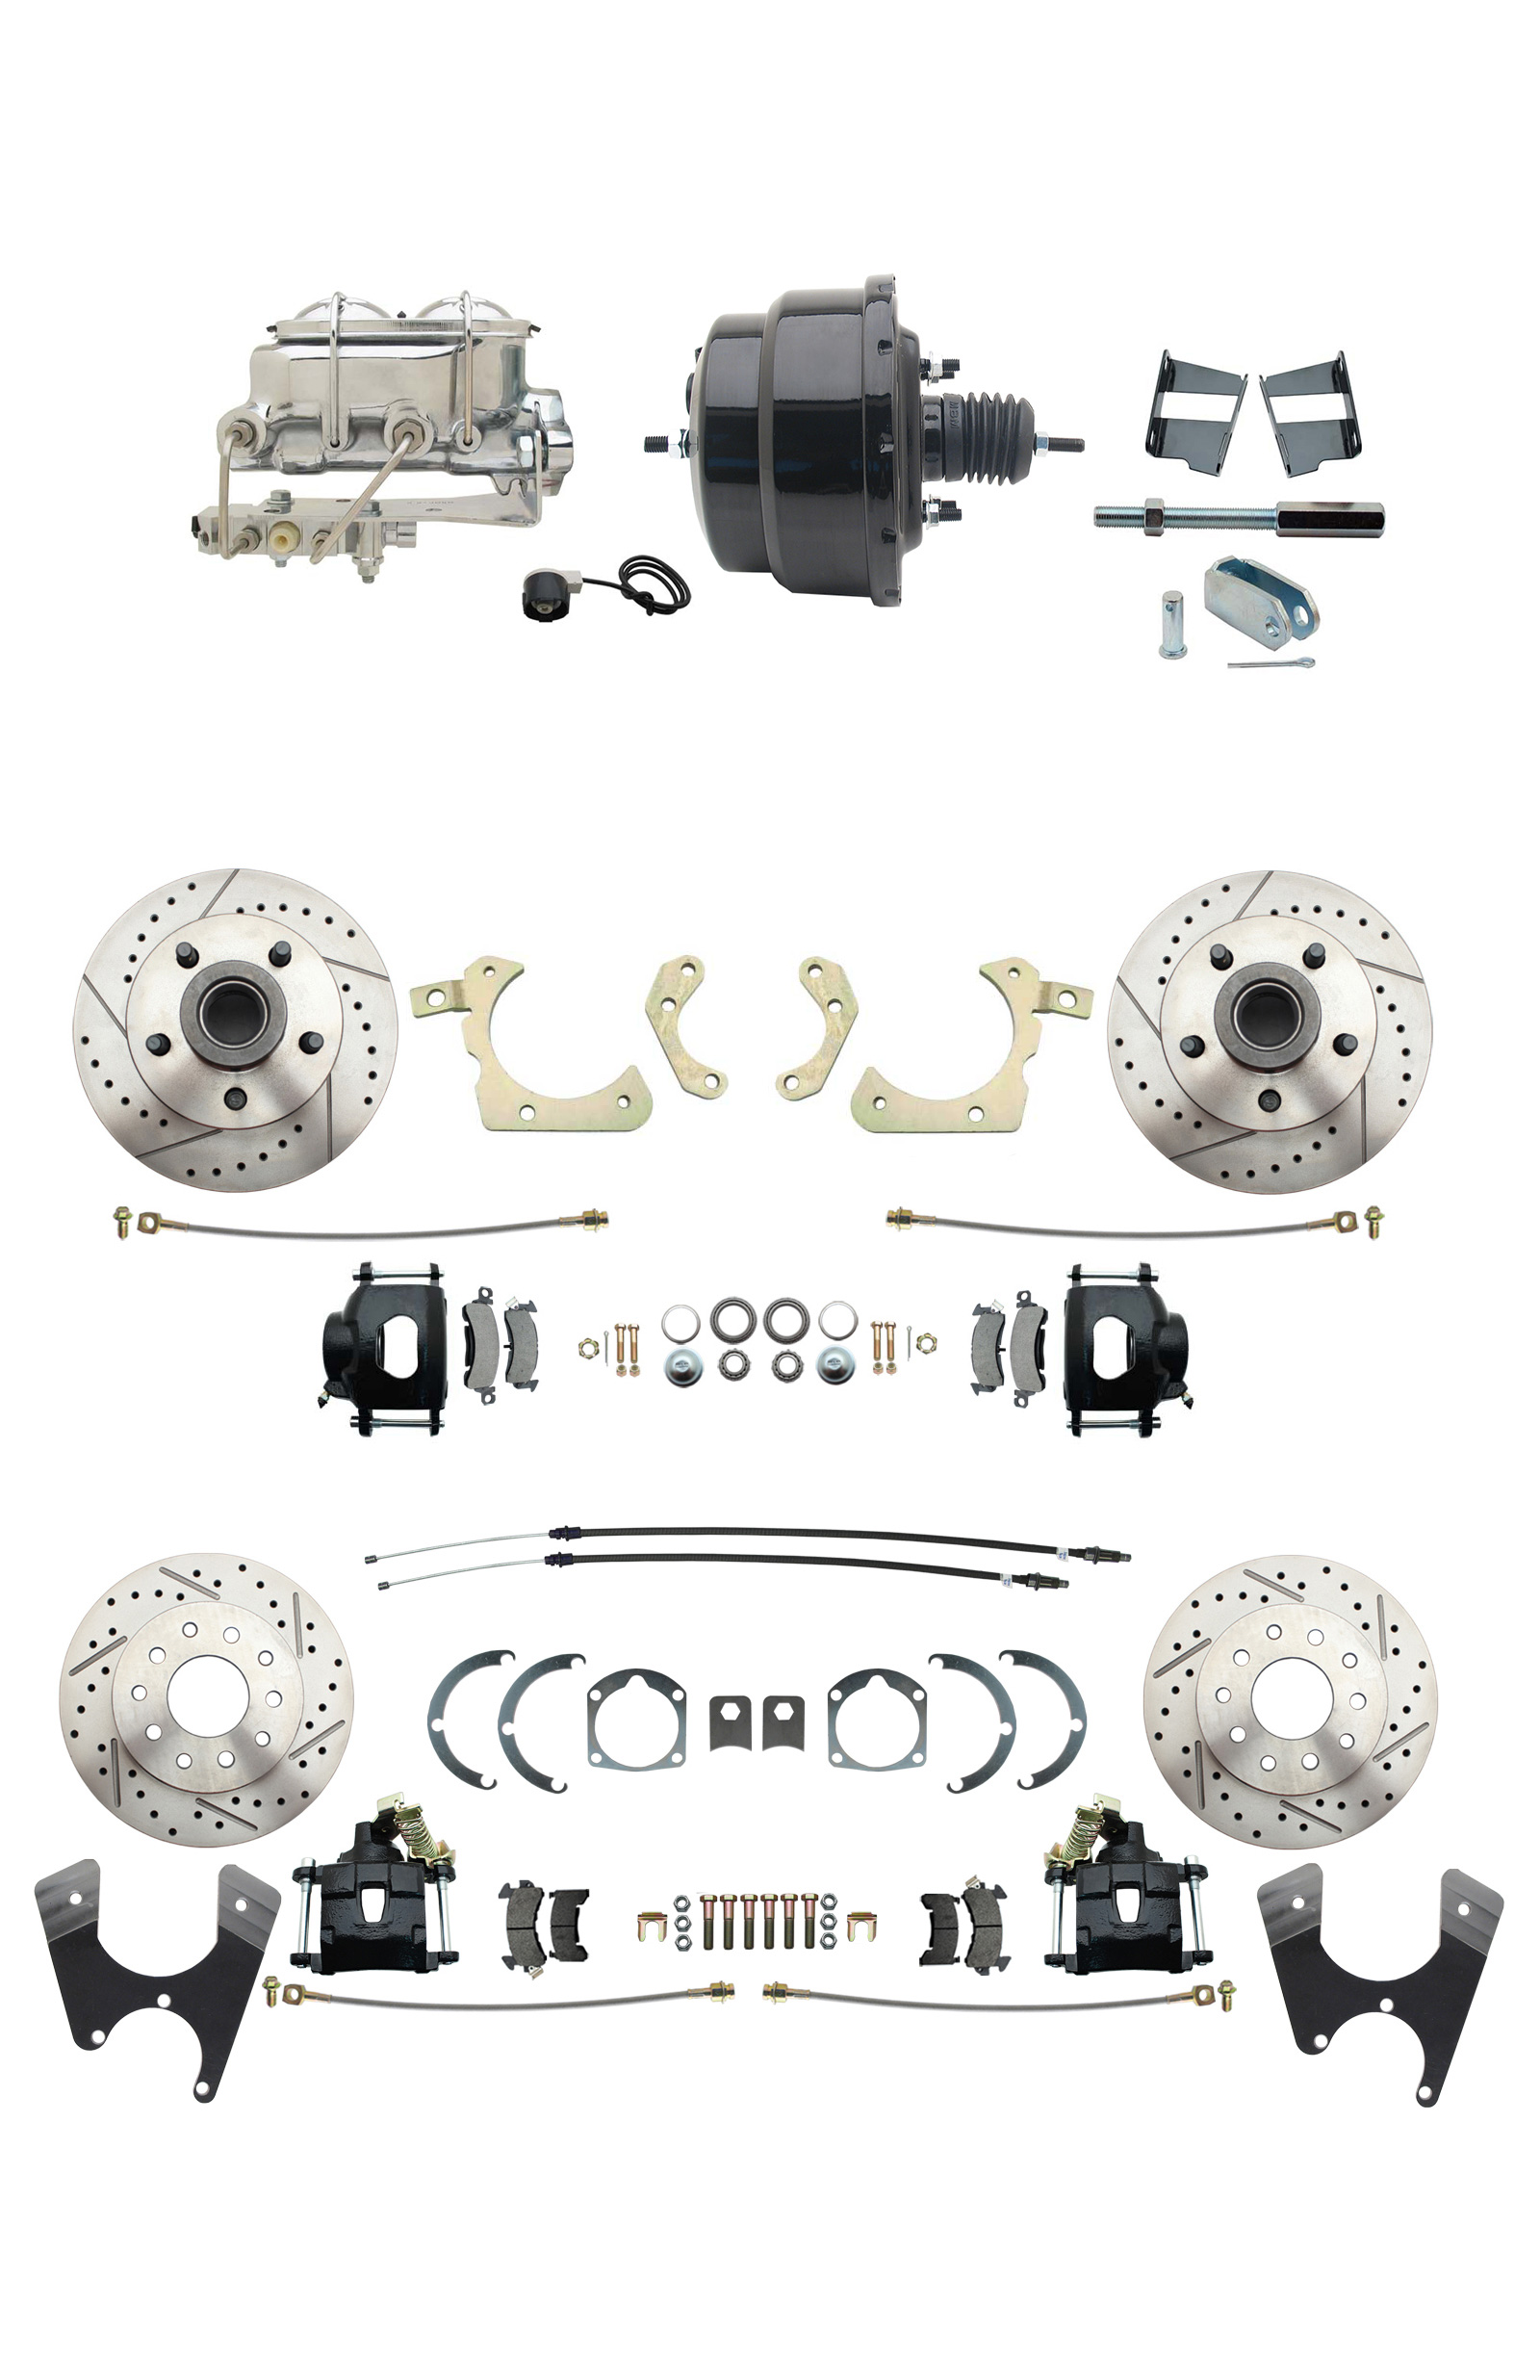 1959-1964 GM Full Size Front & Rear Power Disc Brake Kit Black Powder Coated Calipers Drilled/Slotted Rotors (Impala, Bel Air, Biscayne) & 8 Dual Powder Coated Black Booster Conversion Kit W/ Chrome Master Cylinder Bott